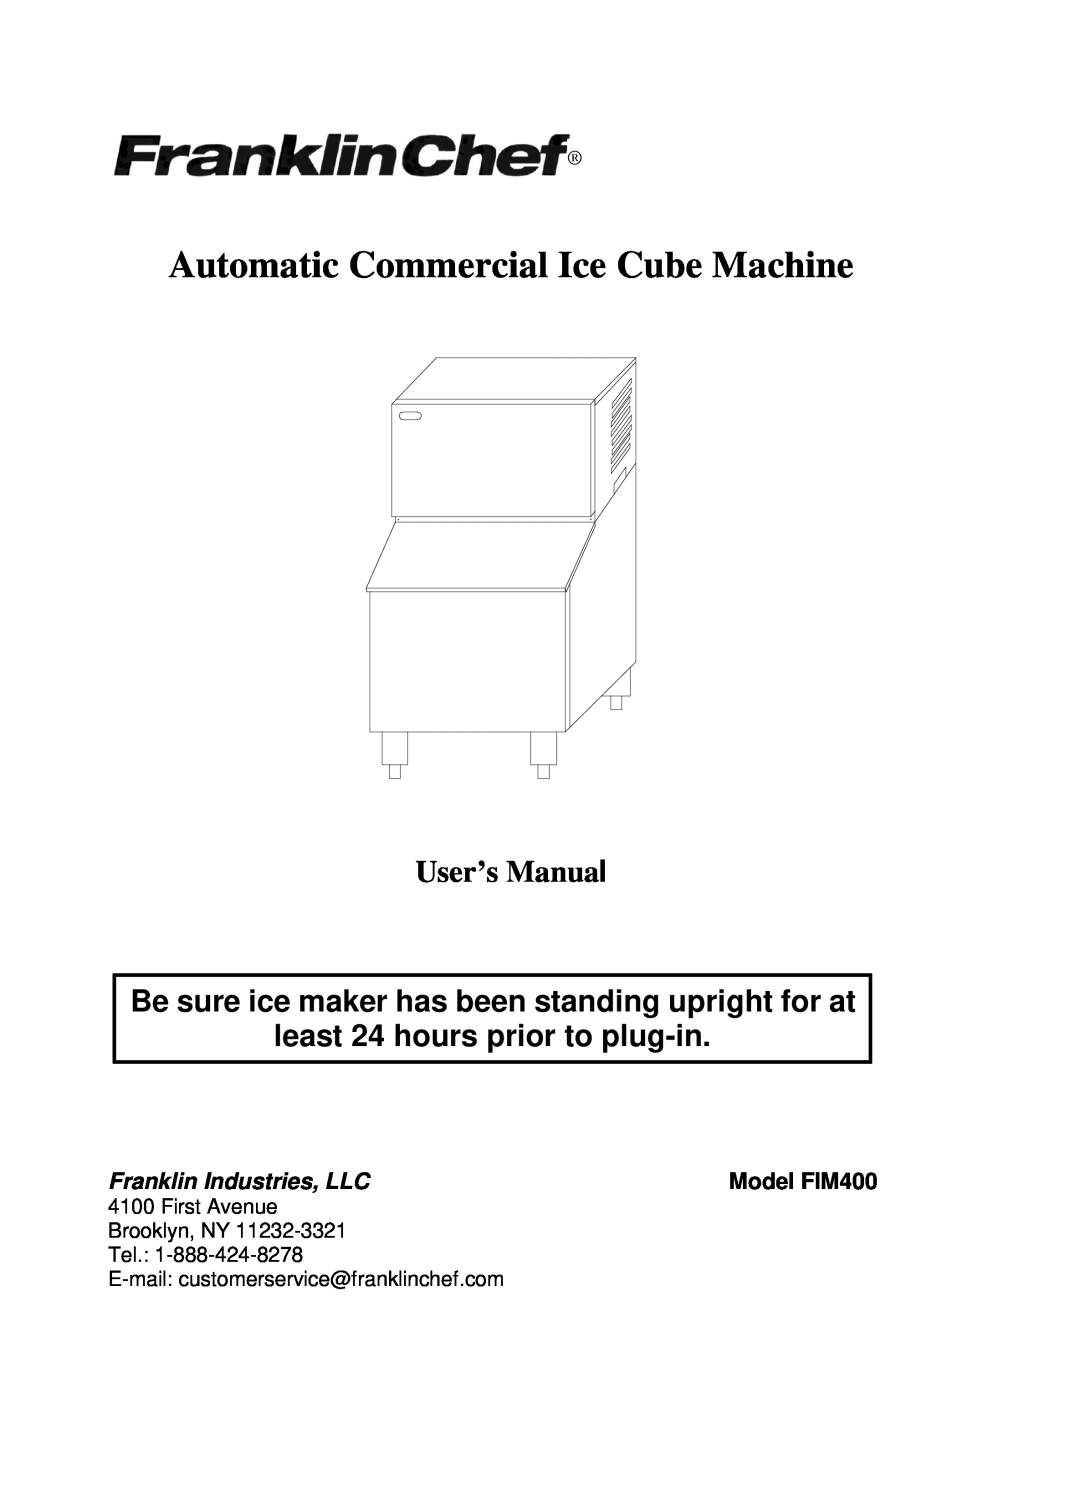 Franklin Industries, L.L.C user manual User’s Manual, Automatic Commercial Ice Cube Machine, Model FIM400 